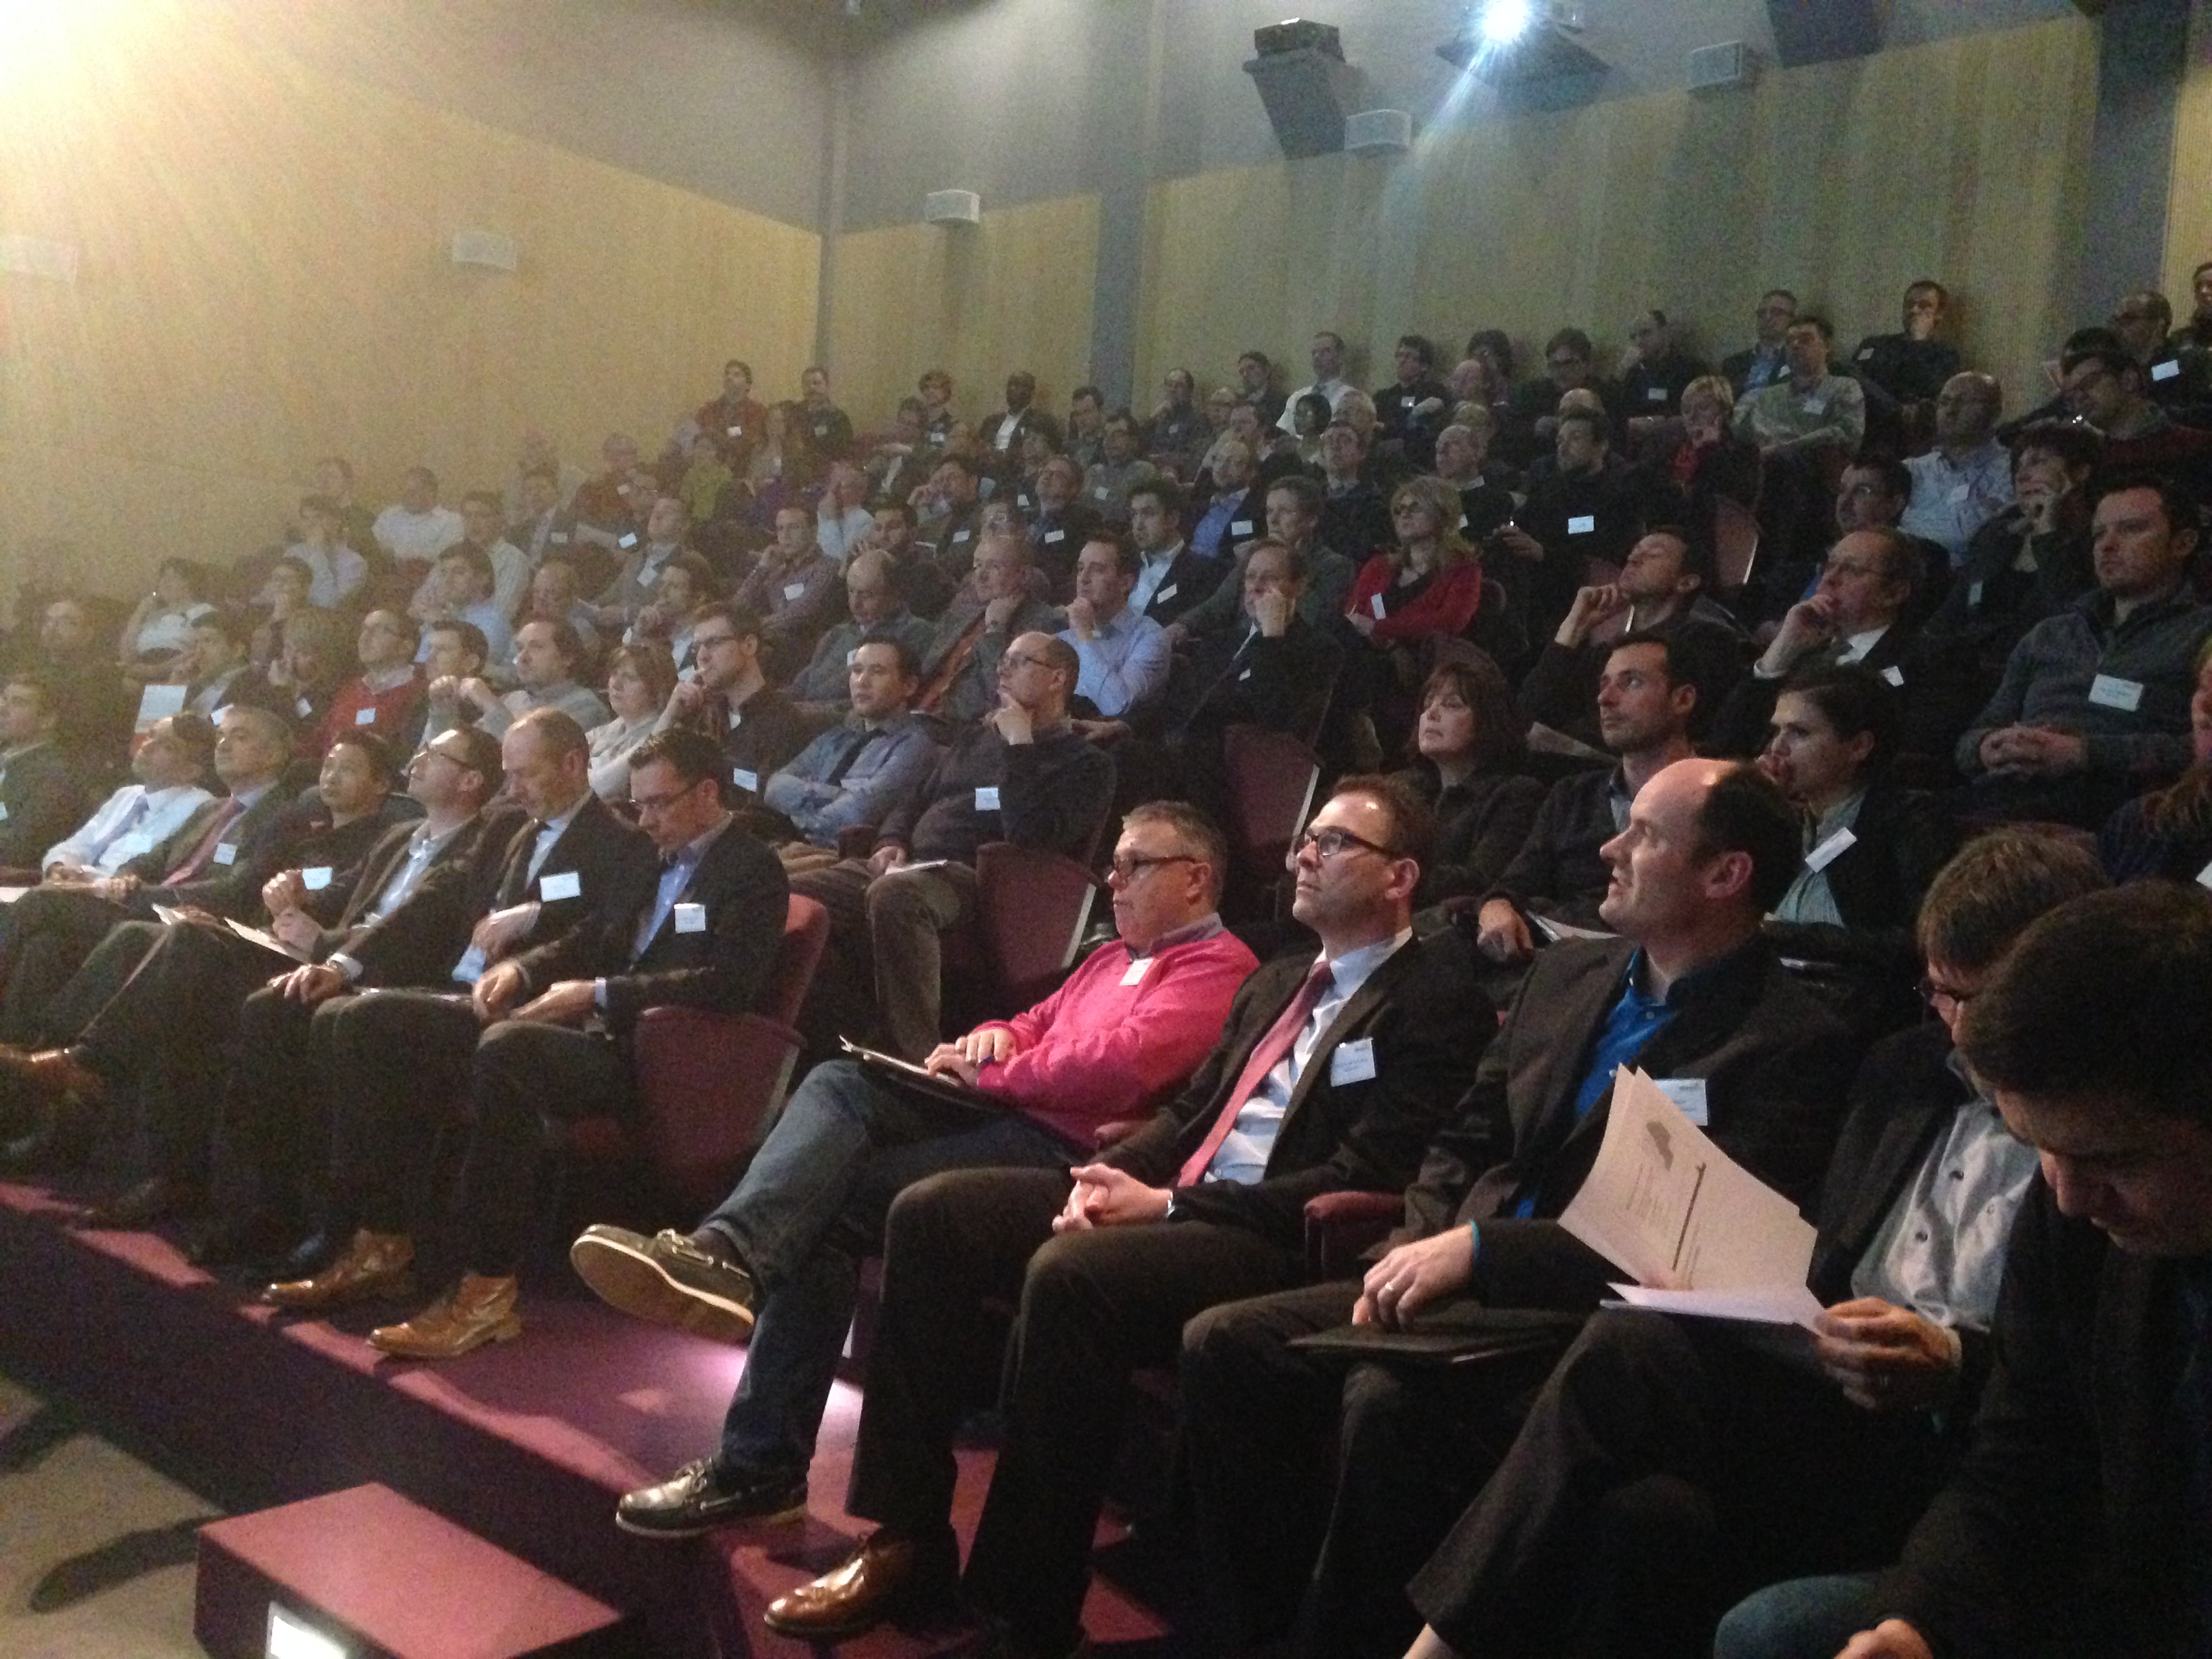 Microsoft Business Analytics Day 2014 welcomes over 140 people !